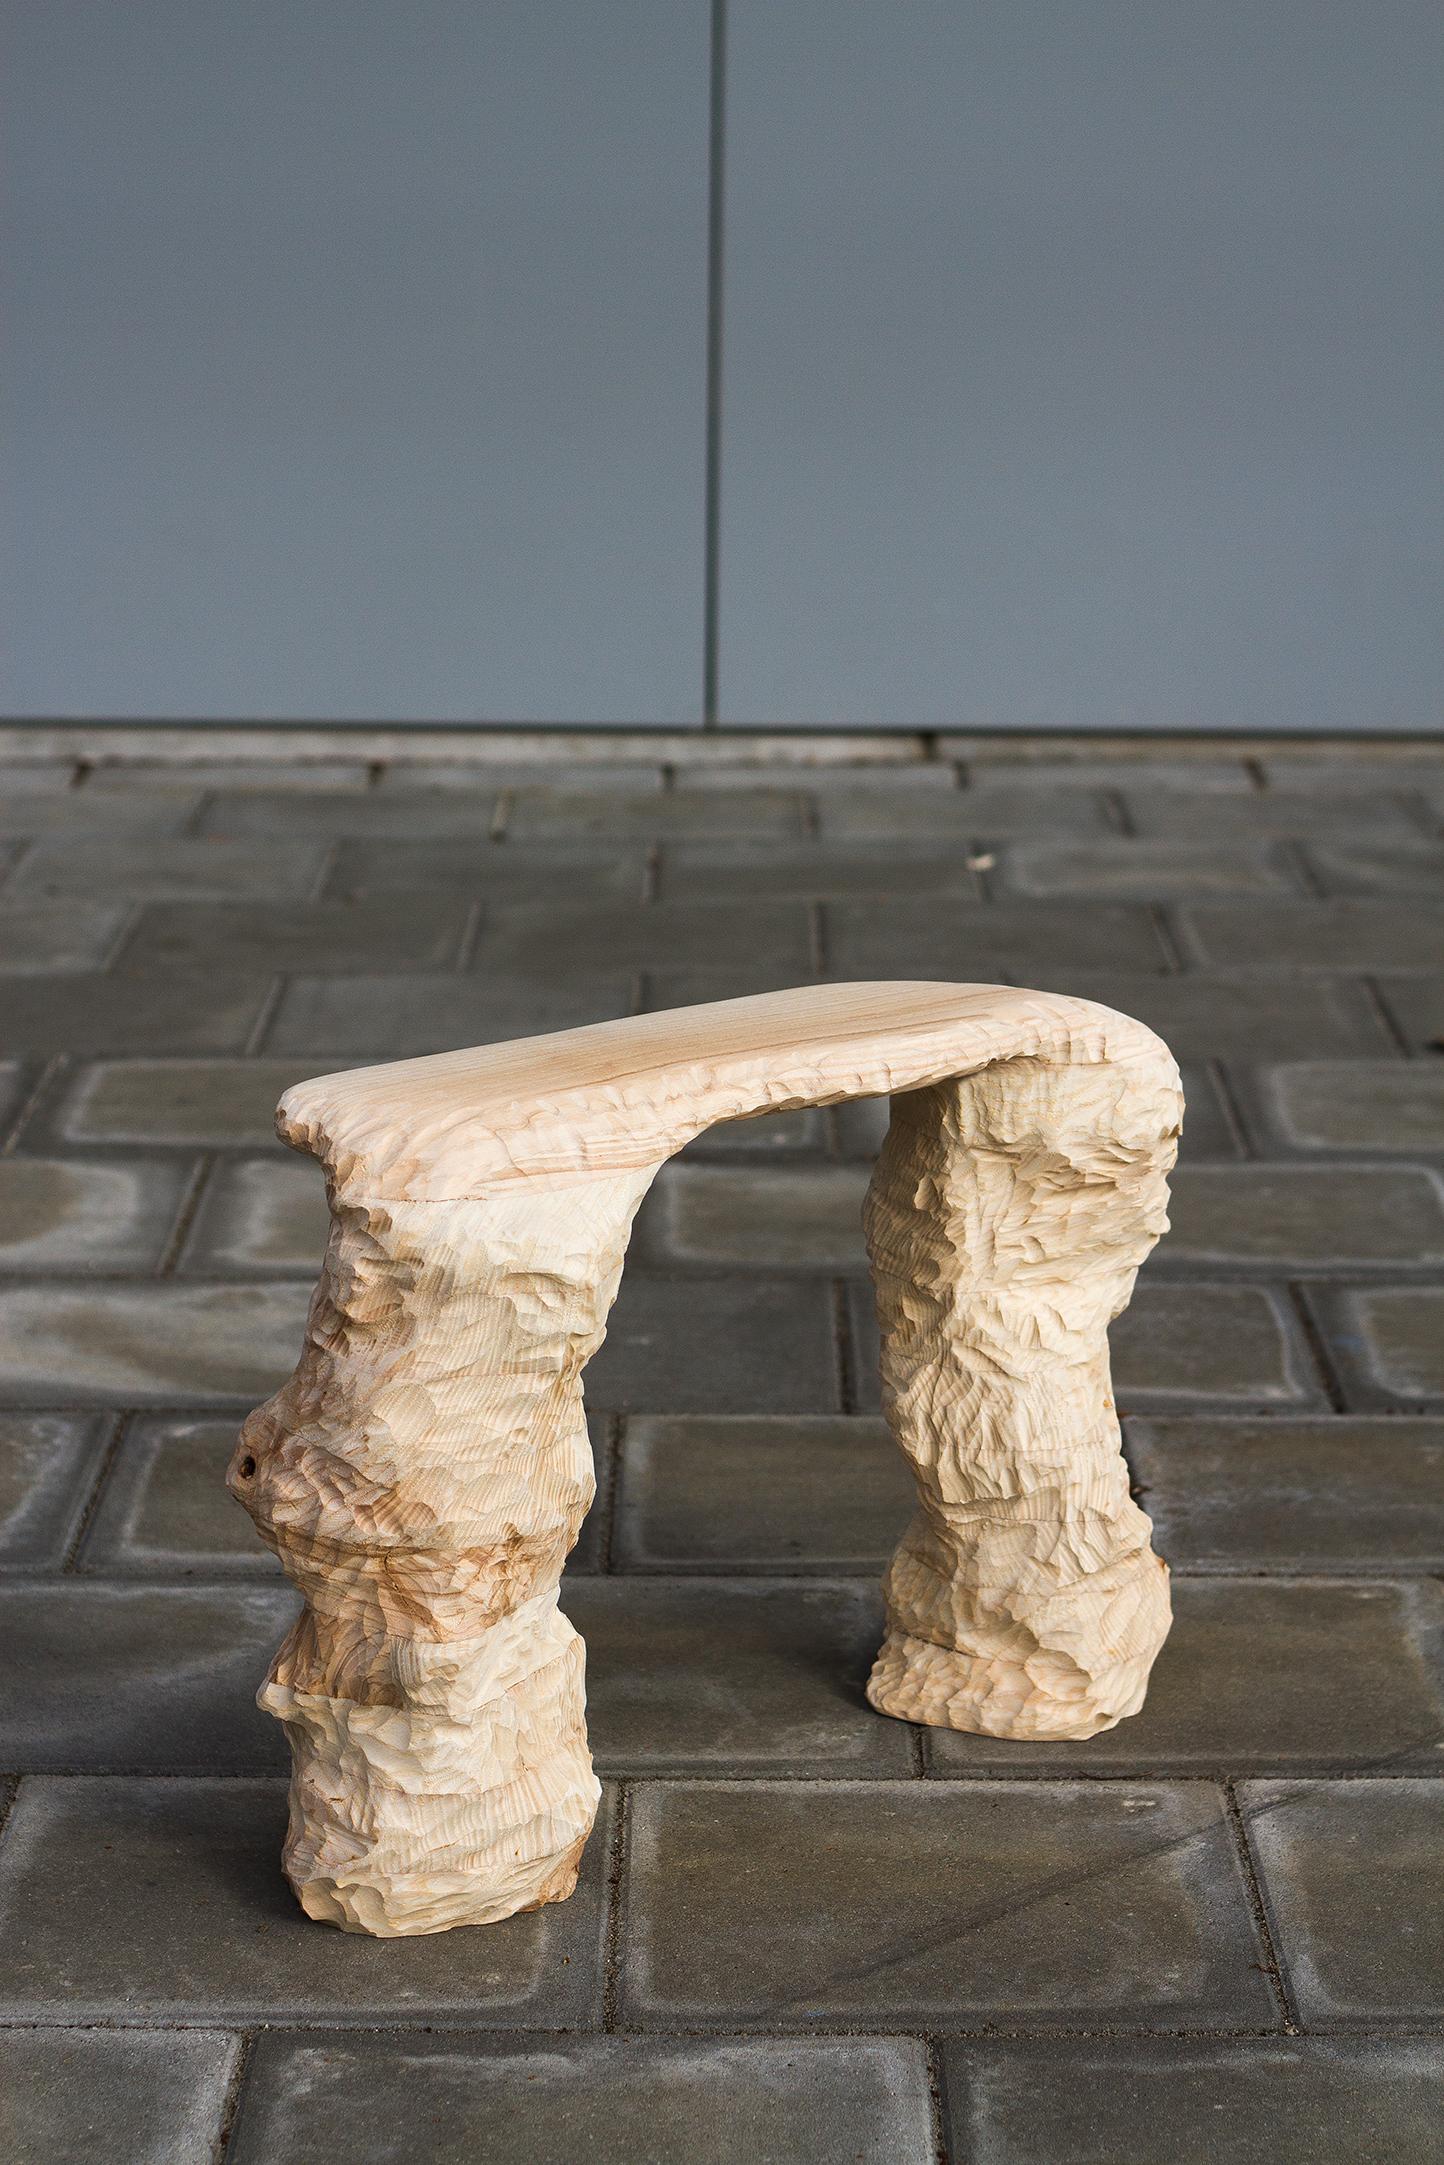 Series of Stools designed and handcrafted in the Netherlands by Tellurico Design Studio using only high-quality woods.
The three Stools are inspired by the ancient technique of wood carving and adapted to the contemporary aesthetic. This particular